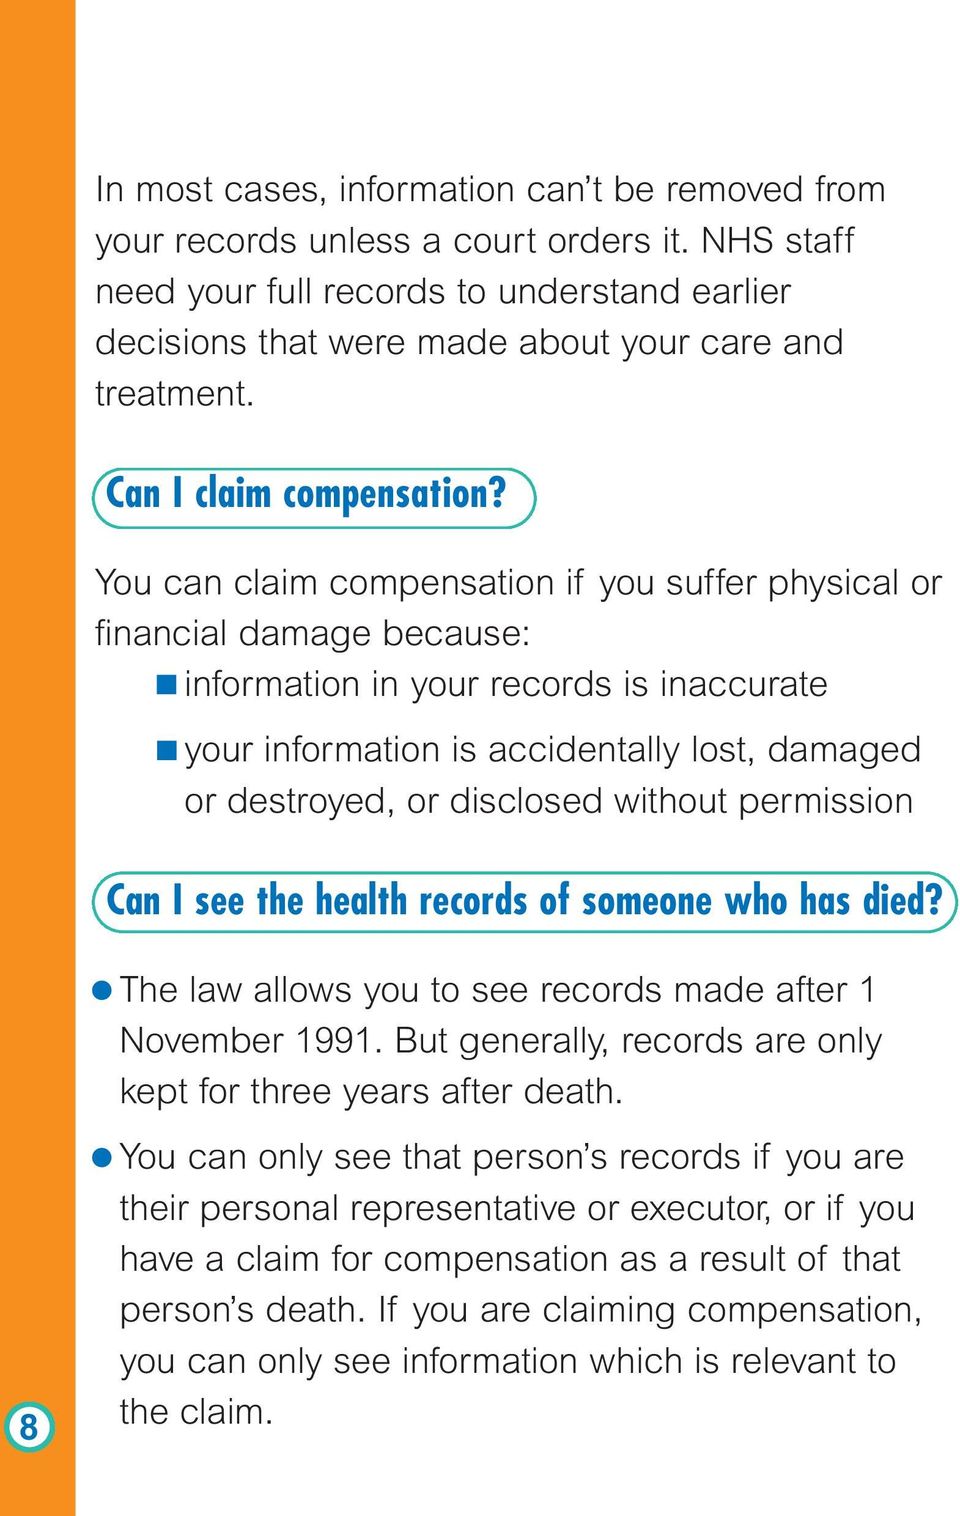 You can claim compensation if you suffer physical or financial damage because: information in your records is inaccurate your information is accidentally lost, damaged or destroyed, or disclosed